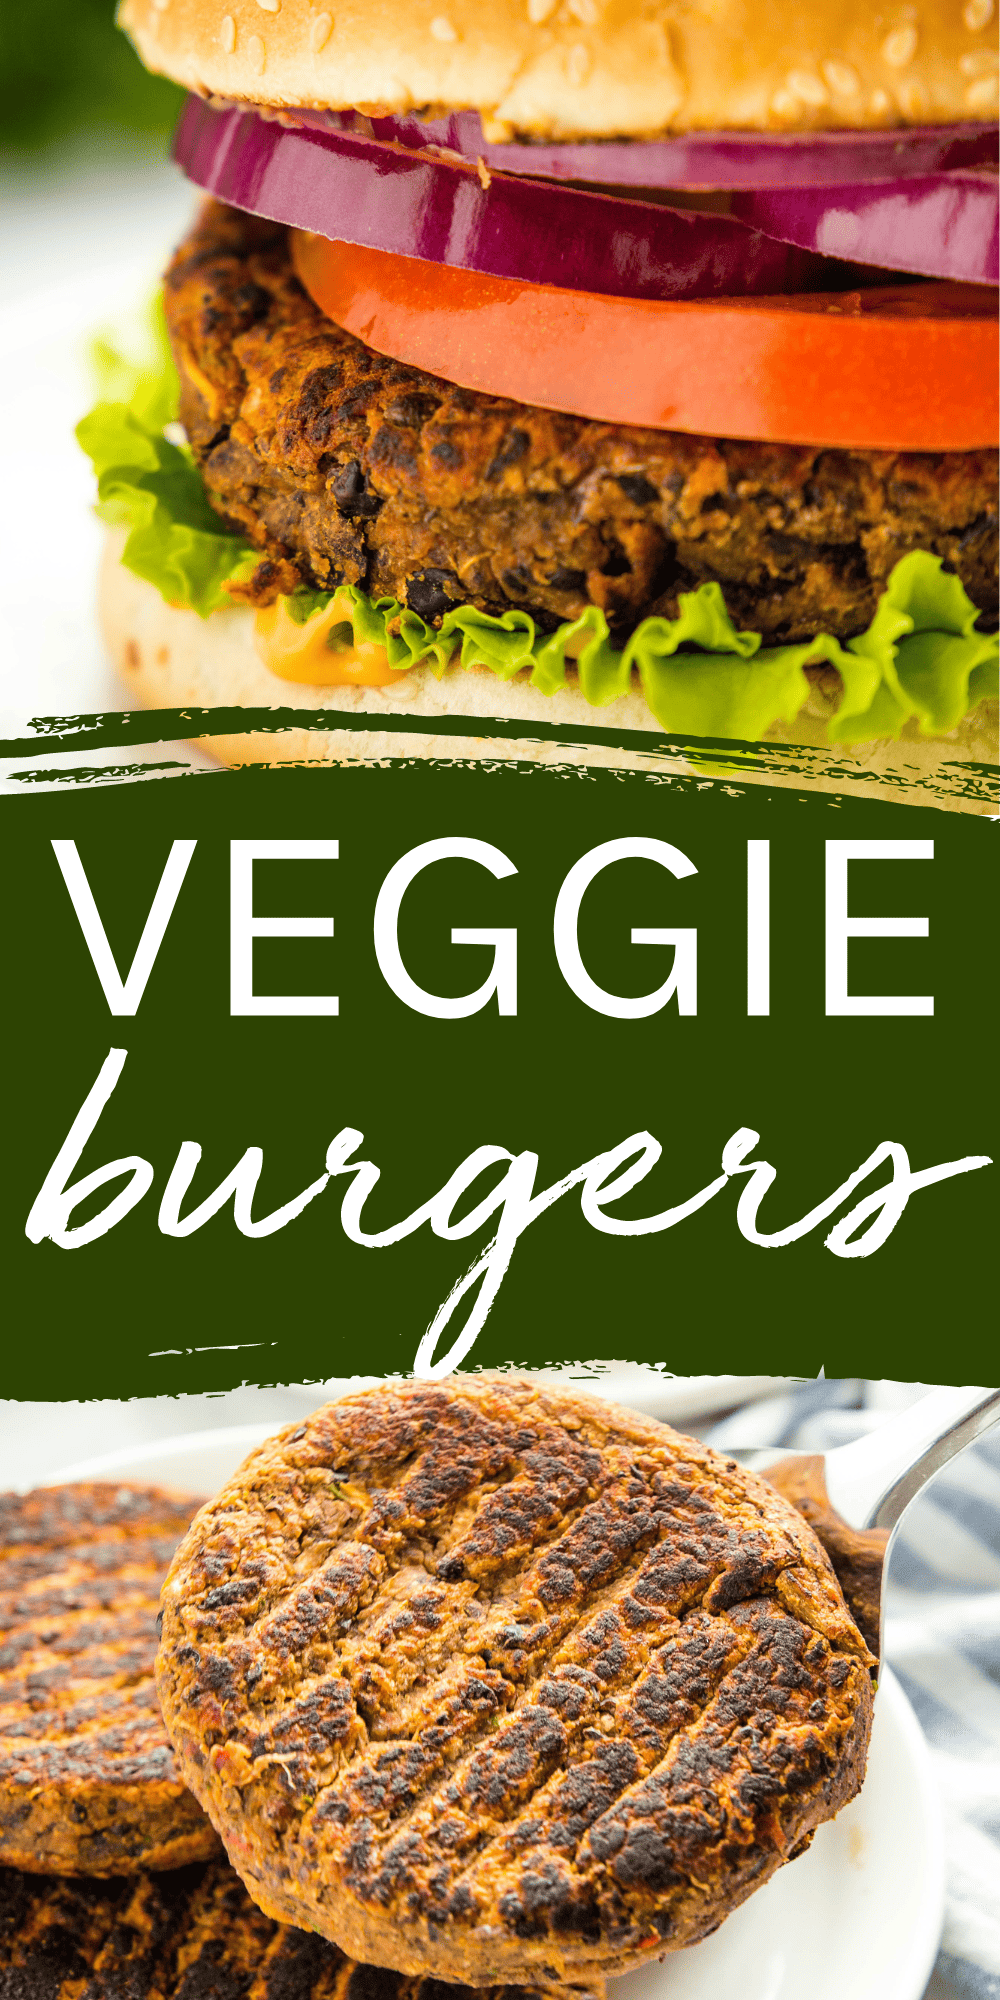 This Veggie Burgers recipe makes the BEST homemade vegan burgers made with real food ingredients. A delicious homemade vegan burger made with beans, lentils, sweet potatoes and vegetables - packed with flavour and perfect for grilling or pan frying! Recipe from thebusybaker.ca! #veggieburgers #veggieburgerrecipe #veggieburger #veganburger #veganburgers #veganburgerrecipe #grilling #summerrecipe #summer #vegangrilling #vegan #veggie #homemade via @busybakerblog